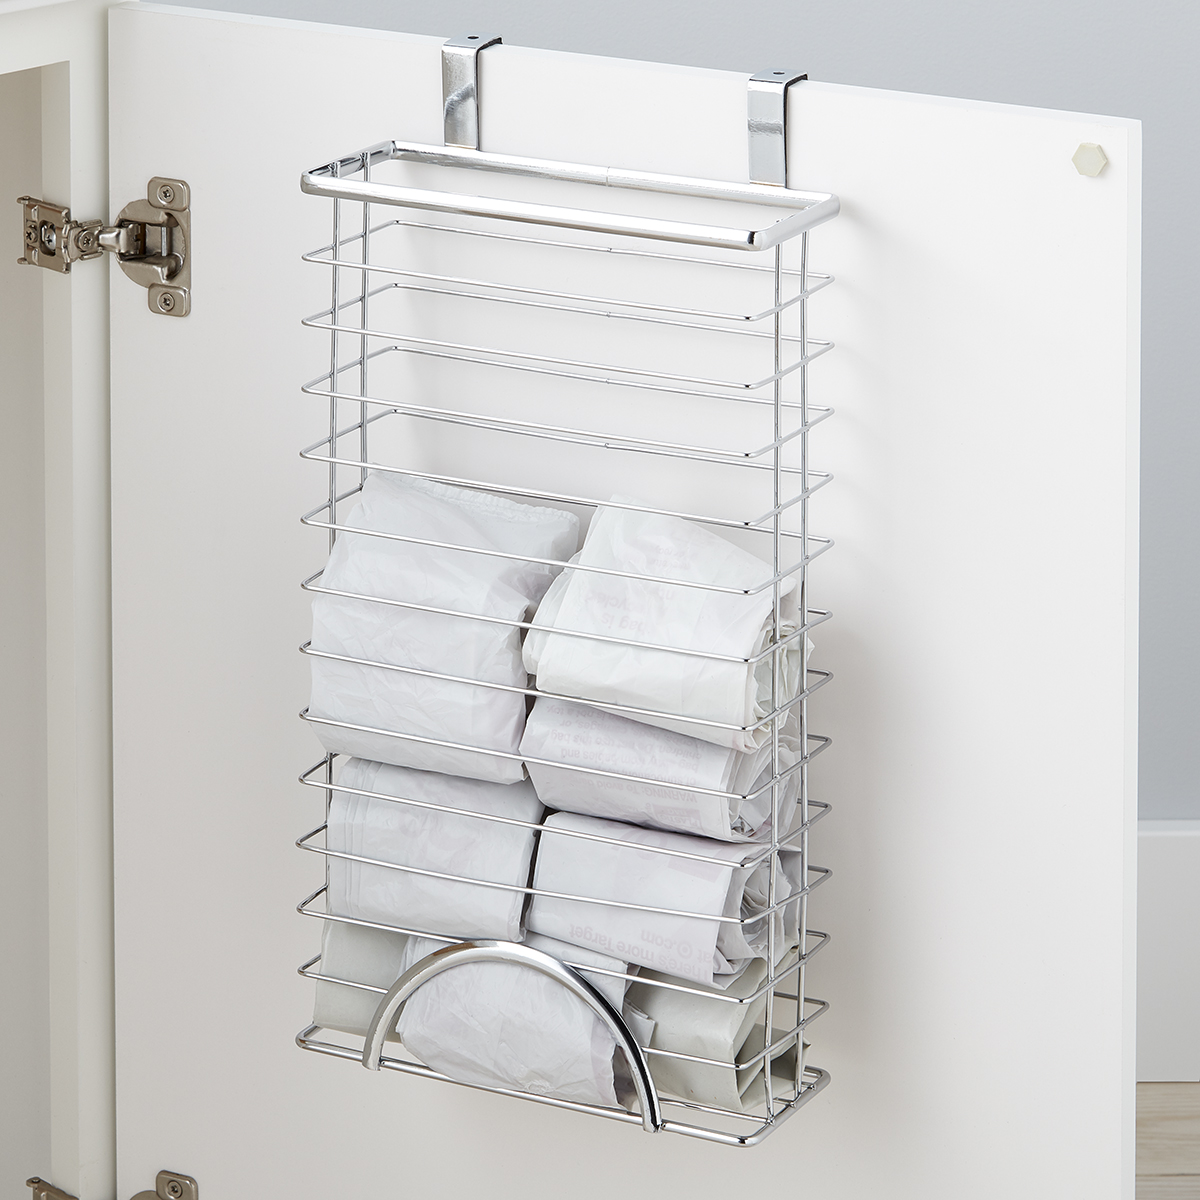 Basicwise Over Cabinet Metal Plastic Bag and Grocery Bag Storage Holder, Chrome